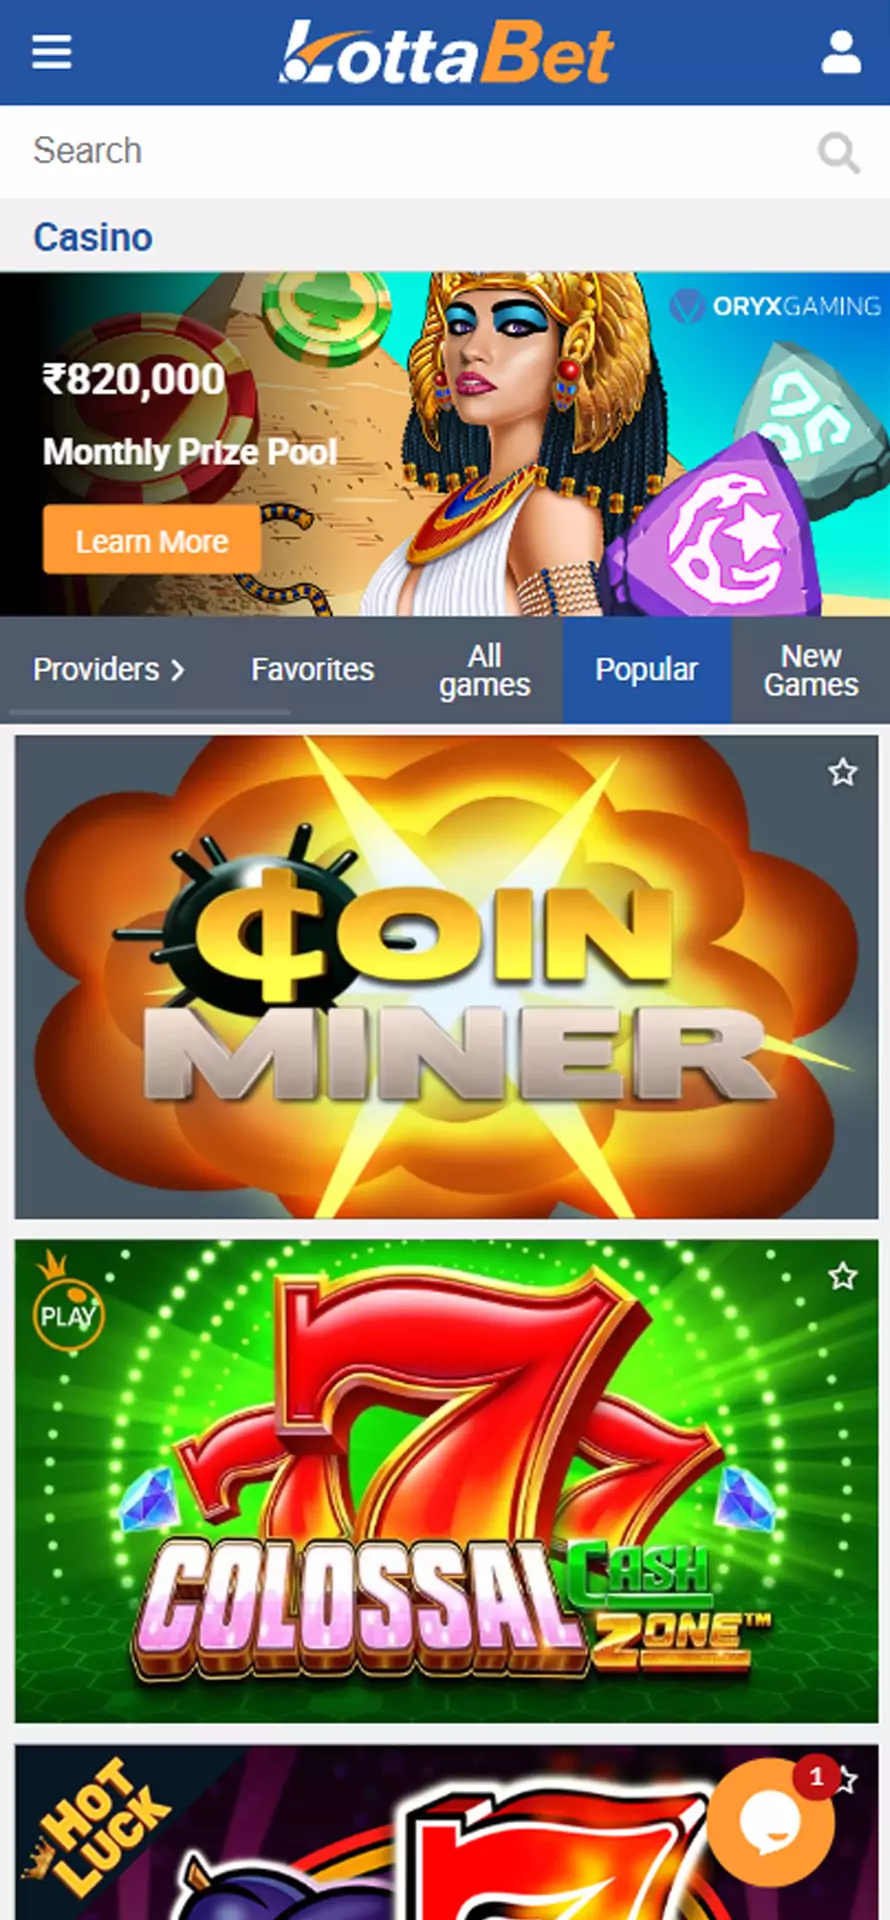 Check for new casino games.